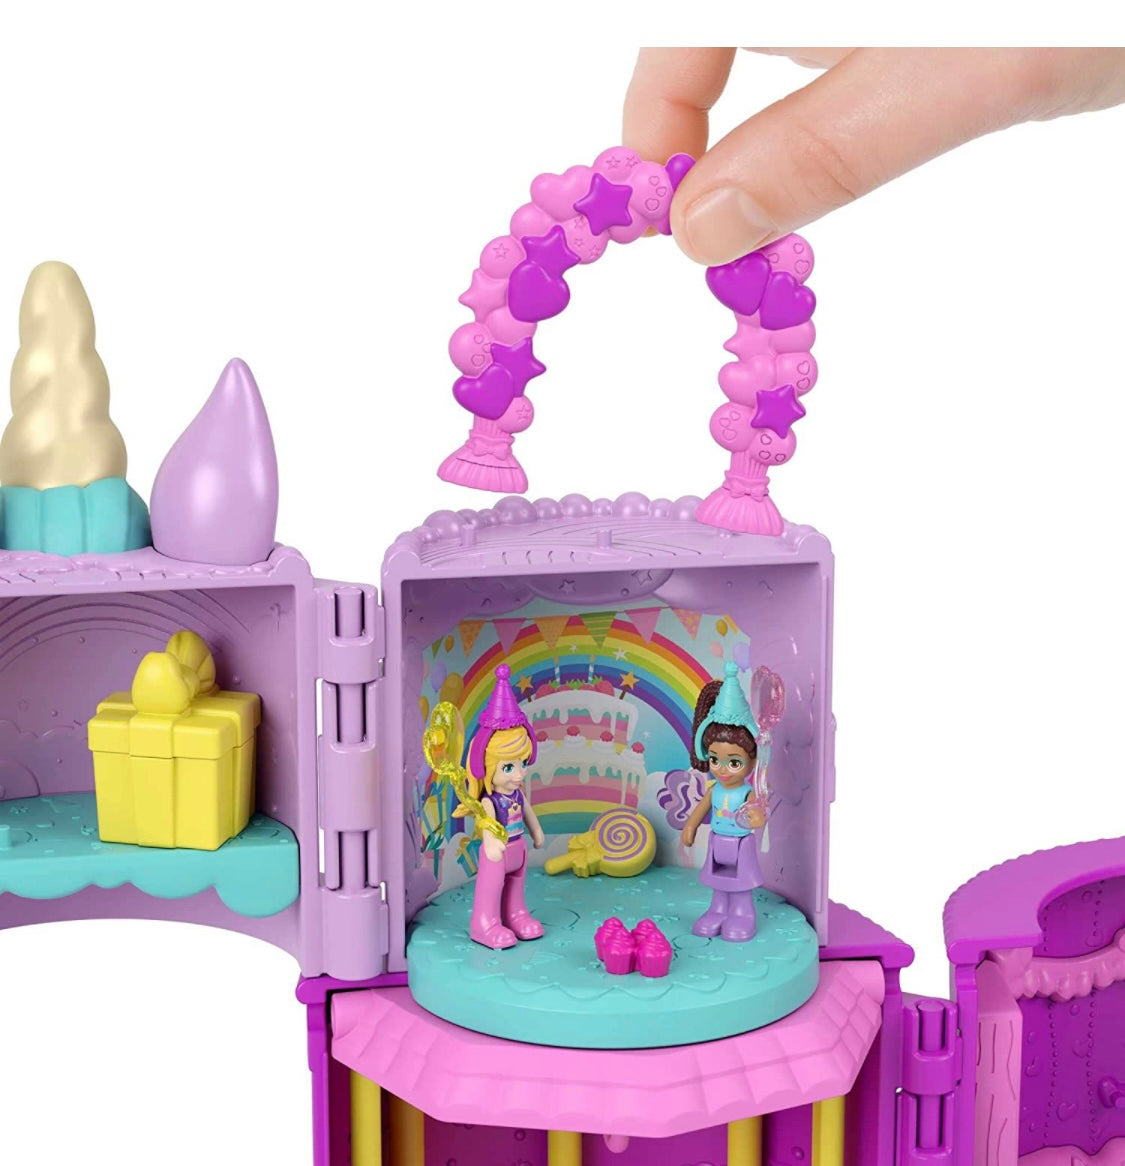 Polly Pocket Spin ‘ N Surprise Birthday